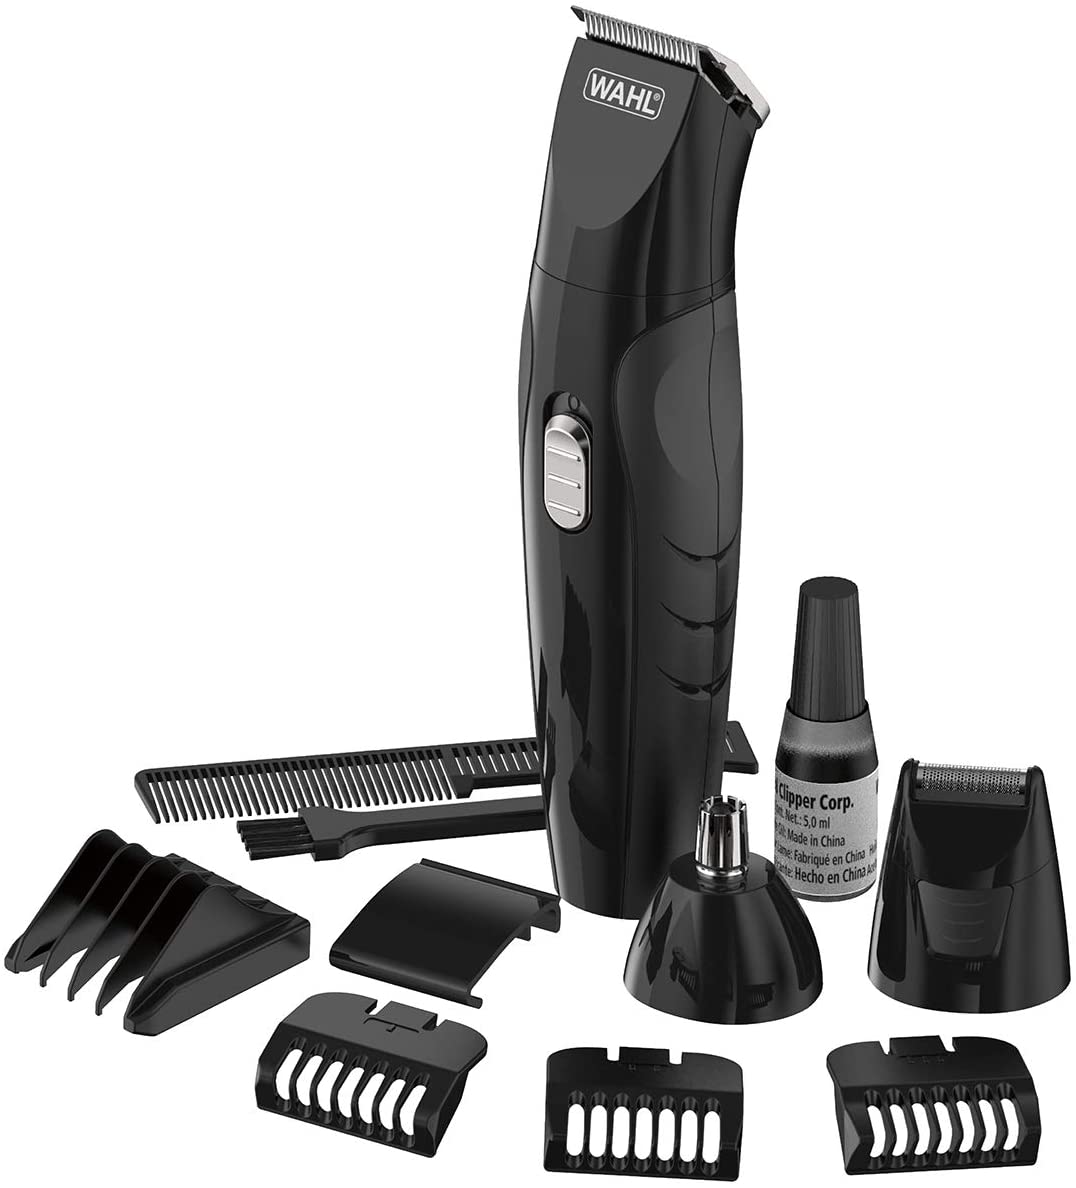 Wahl Groosman All In One Trimmer, 09685-017